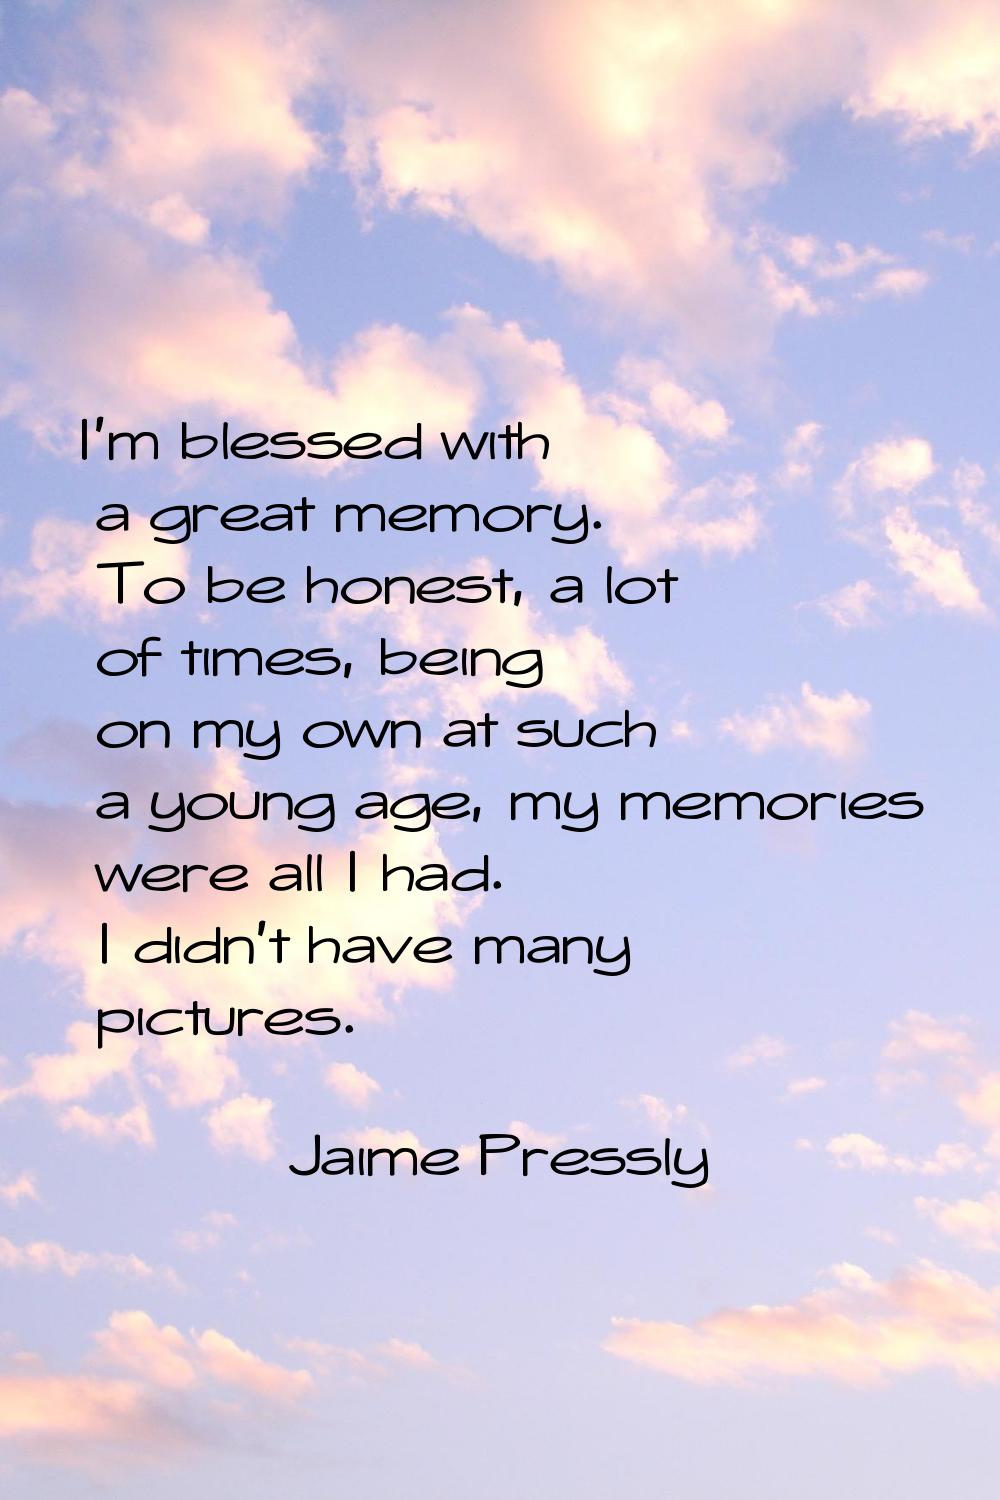 I'm blessed with a great memory. To be honest, a lot of times, being on my own at such a young age,